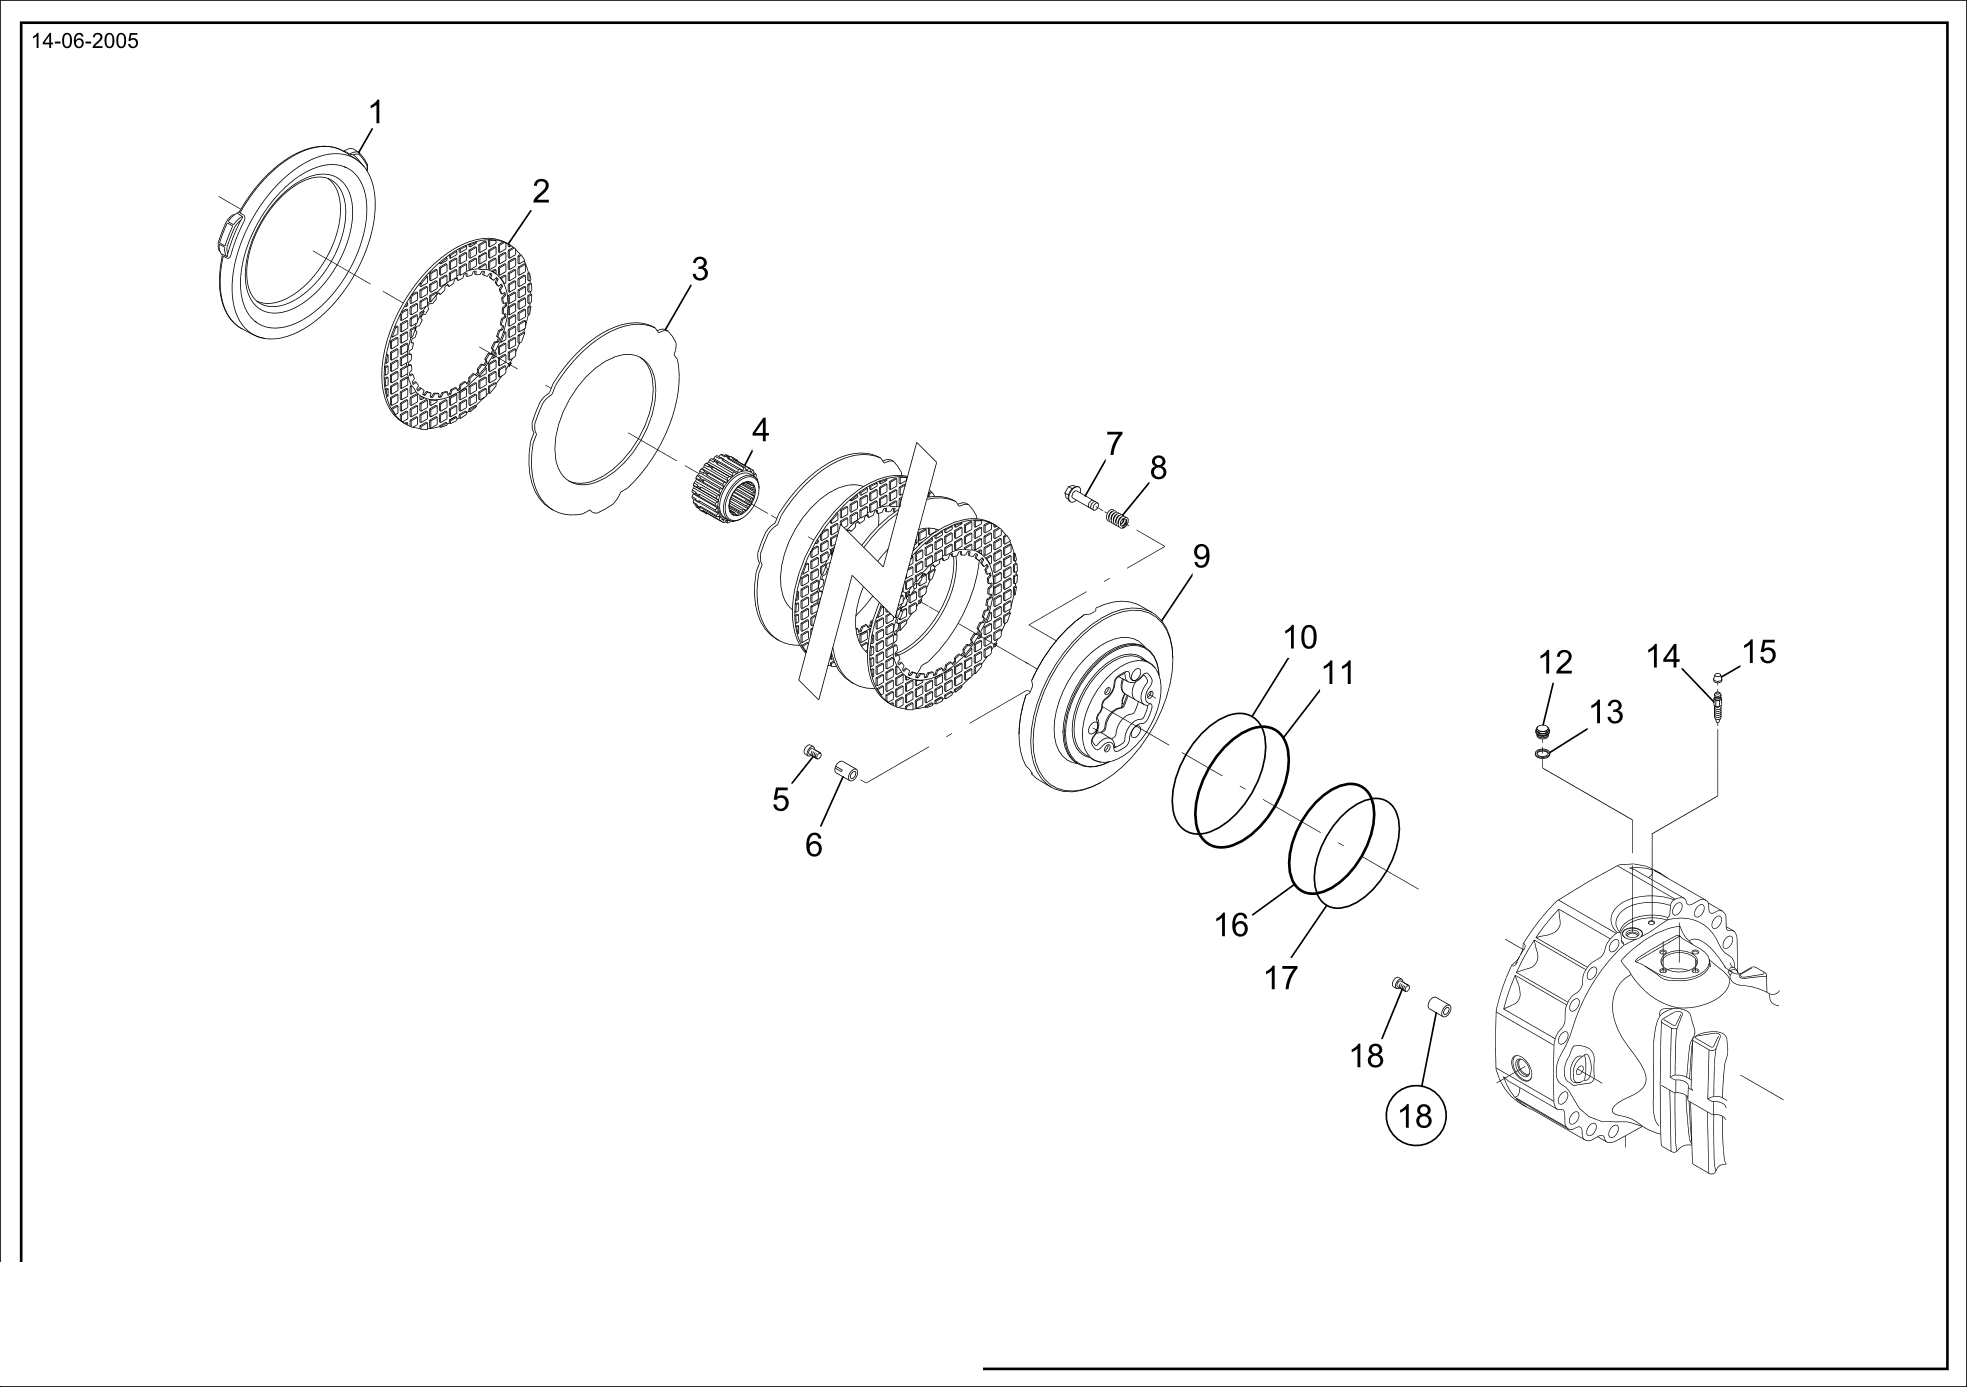 drawing for MERLO 048691 - SEAL (figure 5)